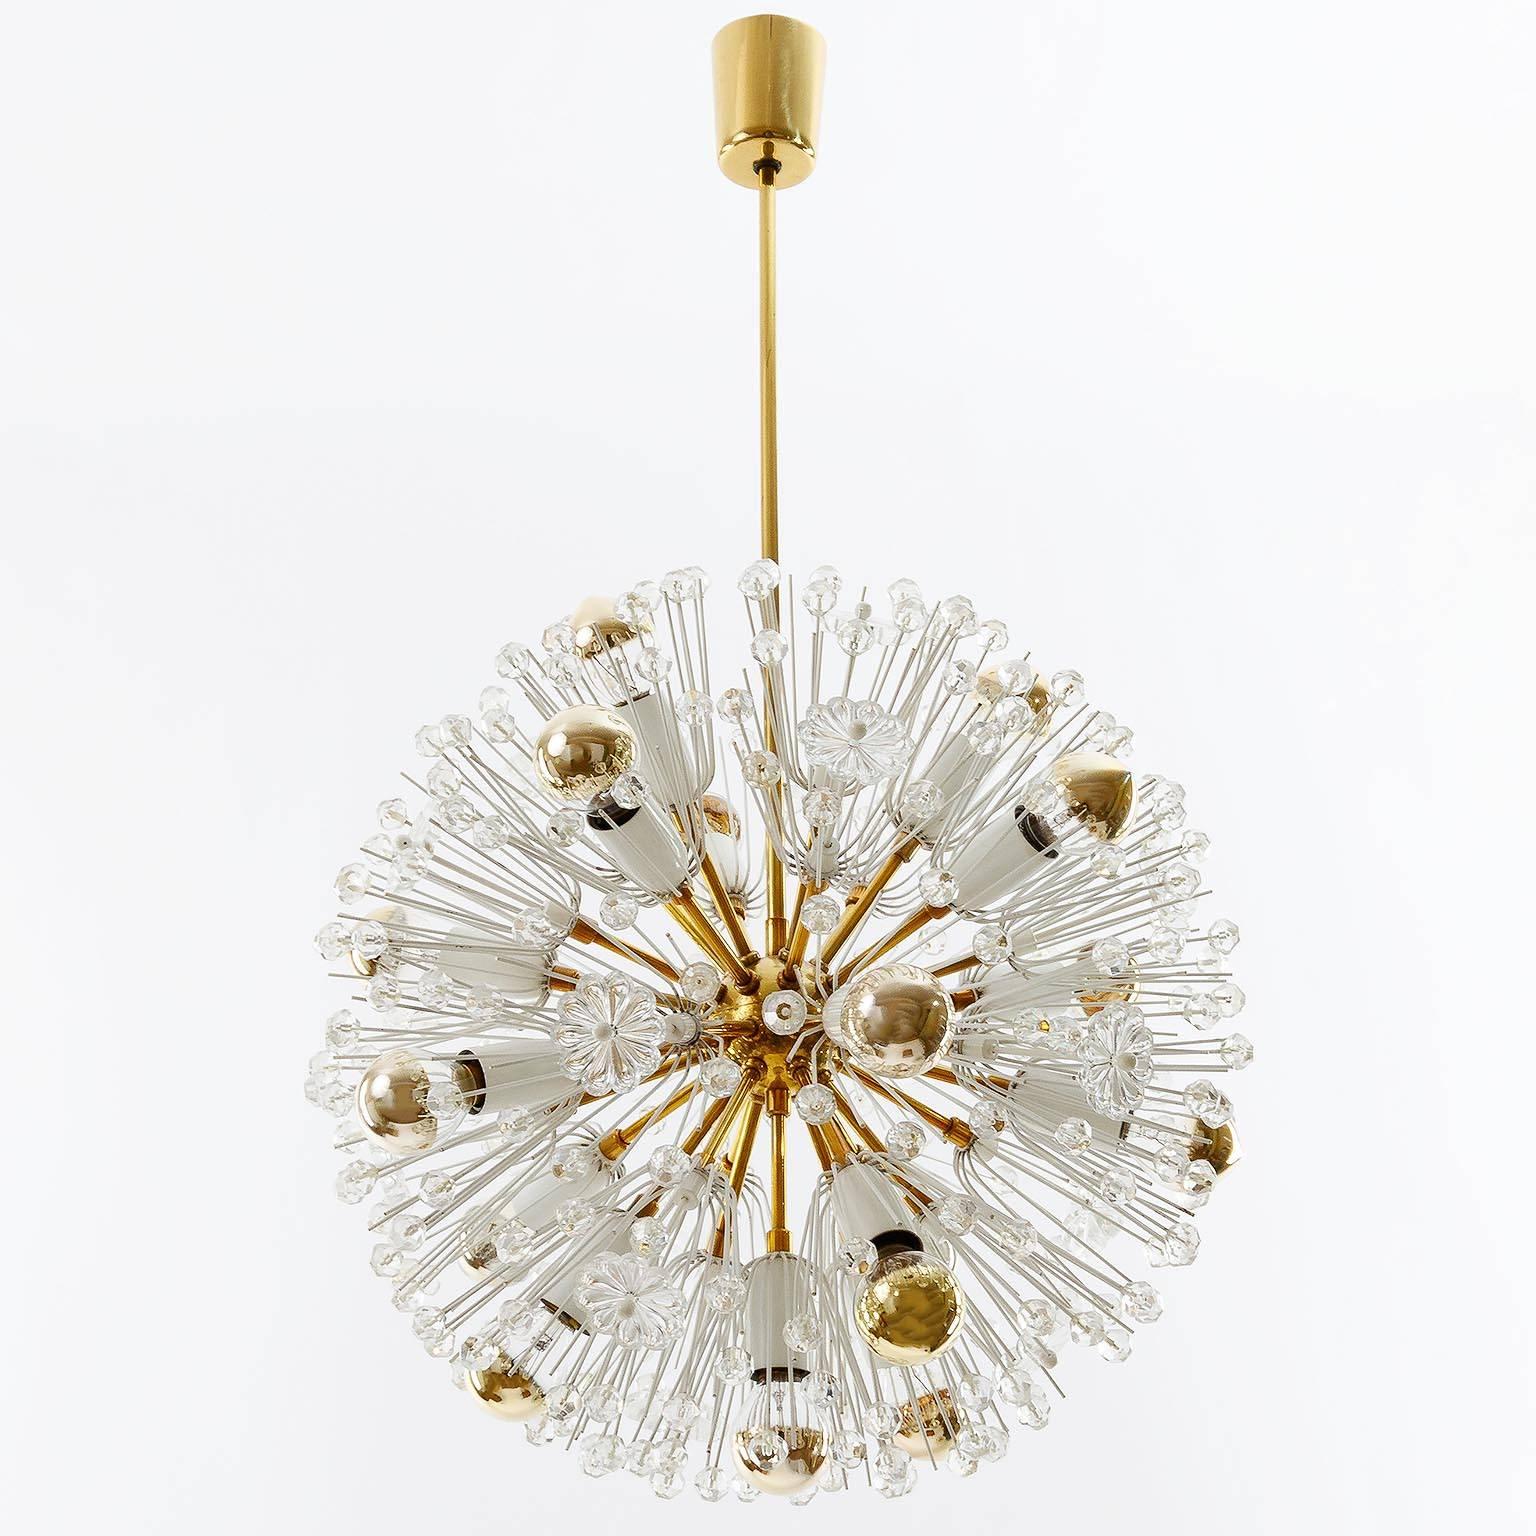 A pair of (a set of two) outstanding 1950s Viennese Sputnik / blowball / snowball chandeliers / pendant lights by Emil Stejnar for Rupert Nikoll, Vienna, Austria. Original vintage pieces manufactured in Mid-Century. Excellent condition, perfect